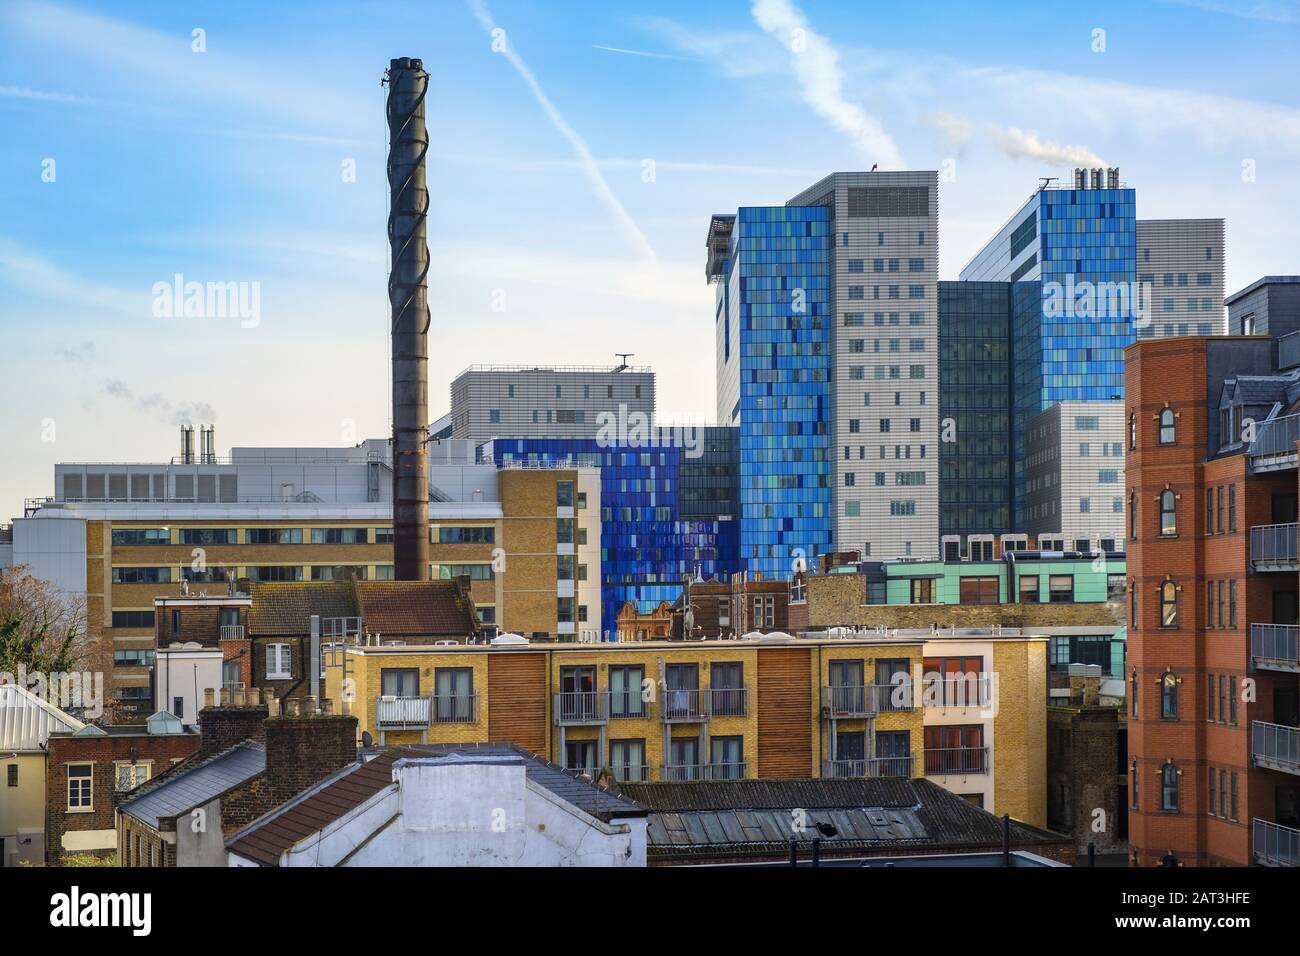 London, England / United Kingdom - 2019/01/29: Panoramic view of the Whitechapel district of East London with fusion of traditional and modernistic architecture neighboring Whitechapel street Stock Photo